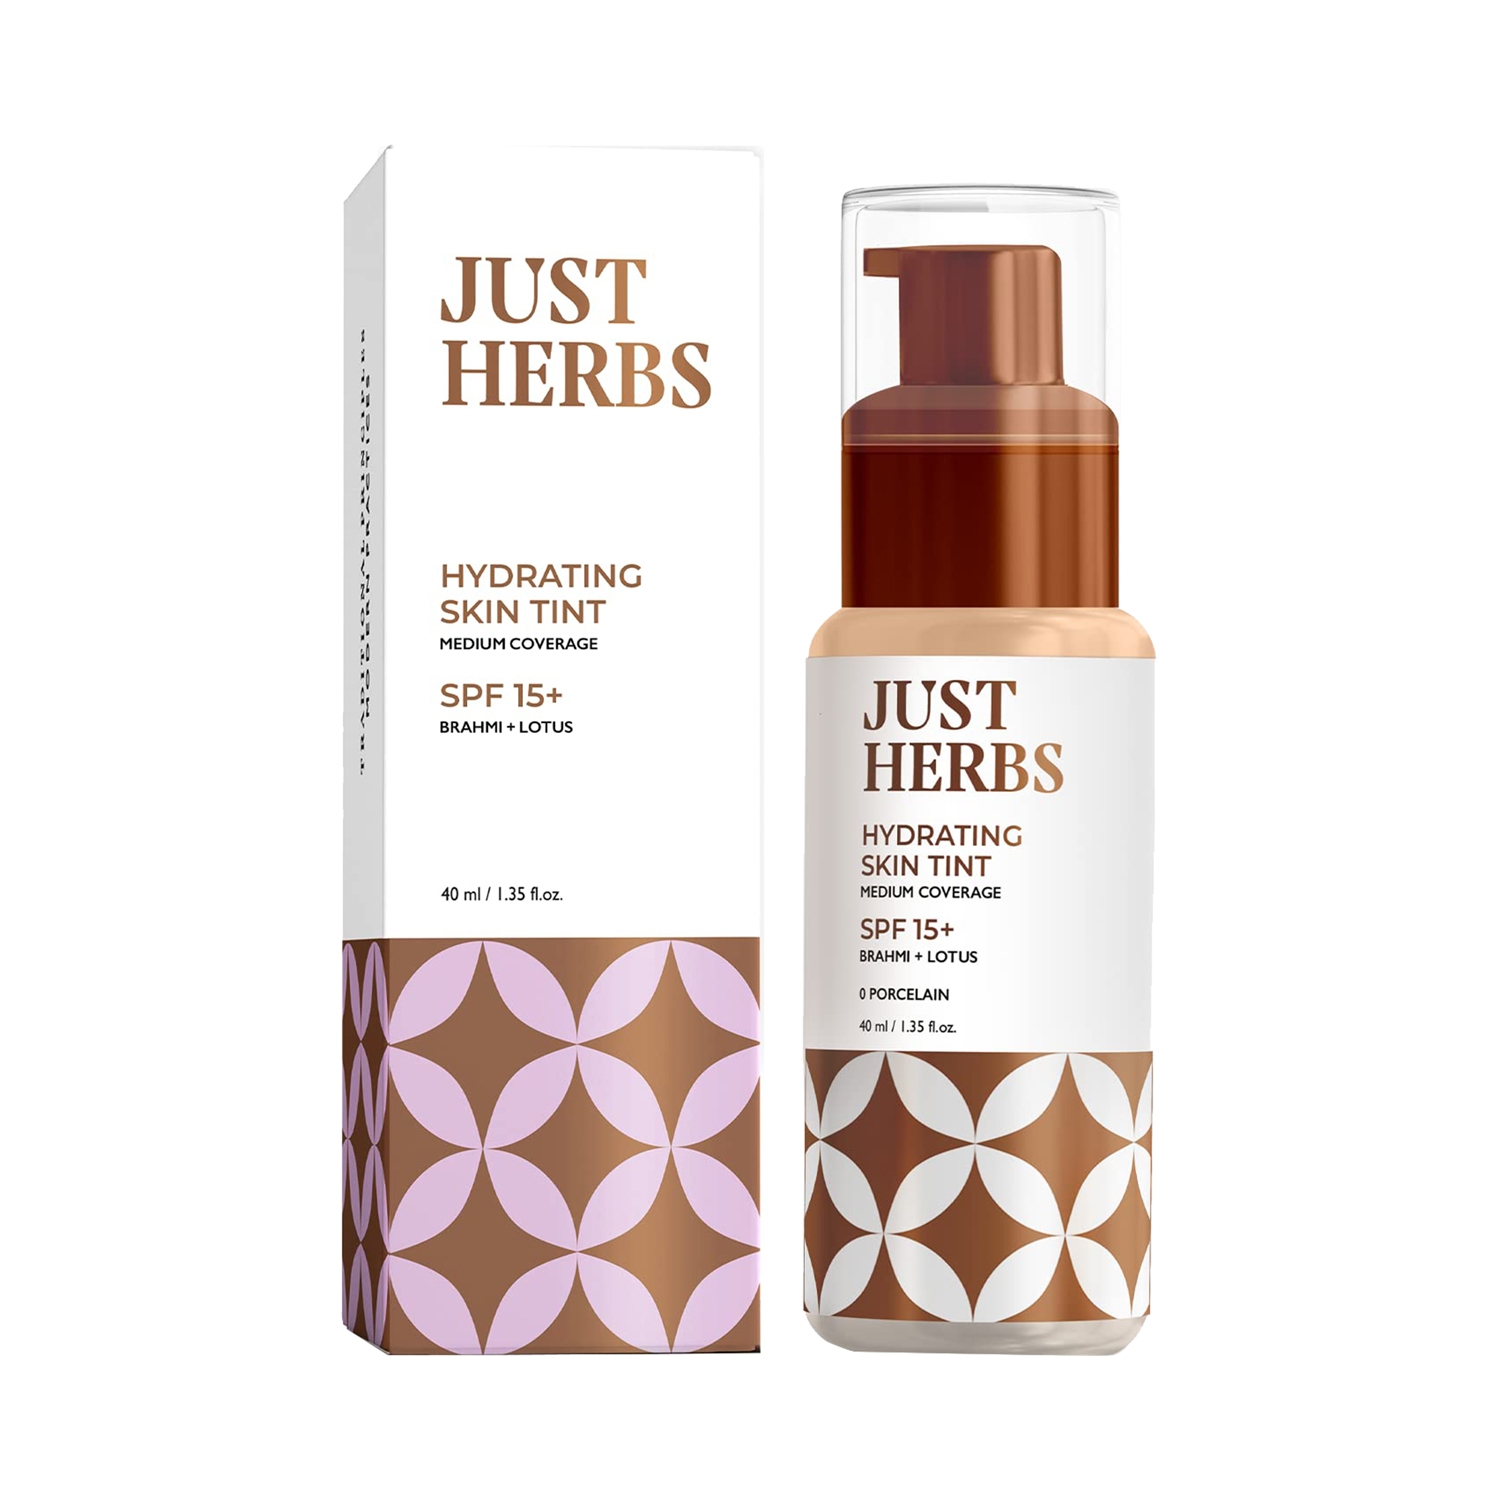 Just Herbs | Just Herbs Hydrating Skin Tint BB Cream Foundation - 0 Porcelain (40ml)